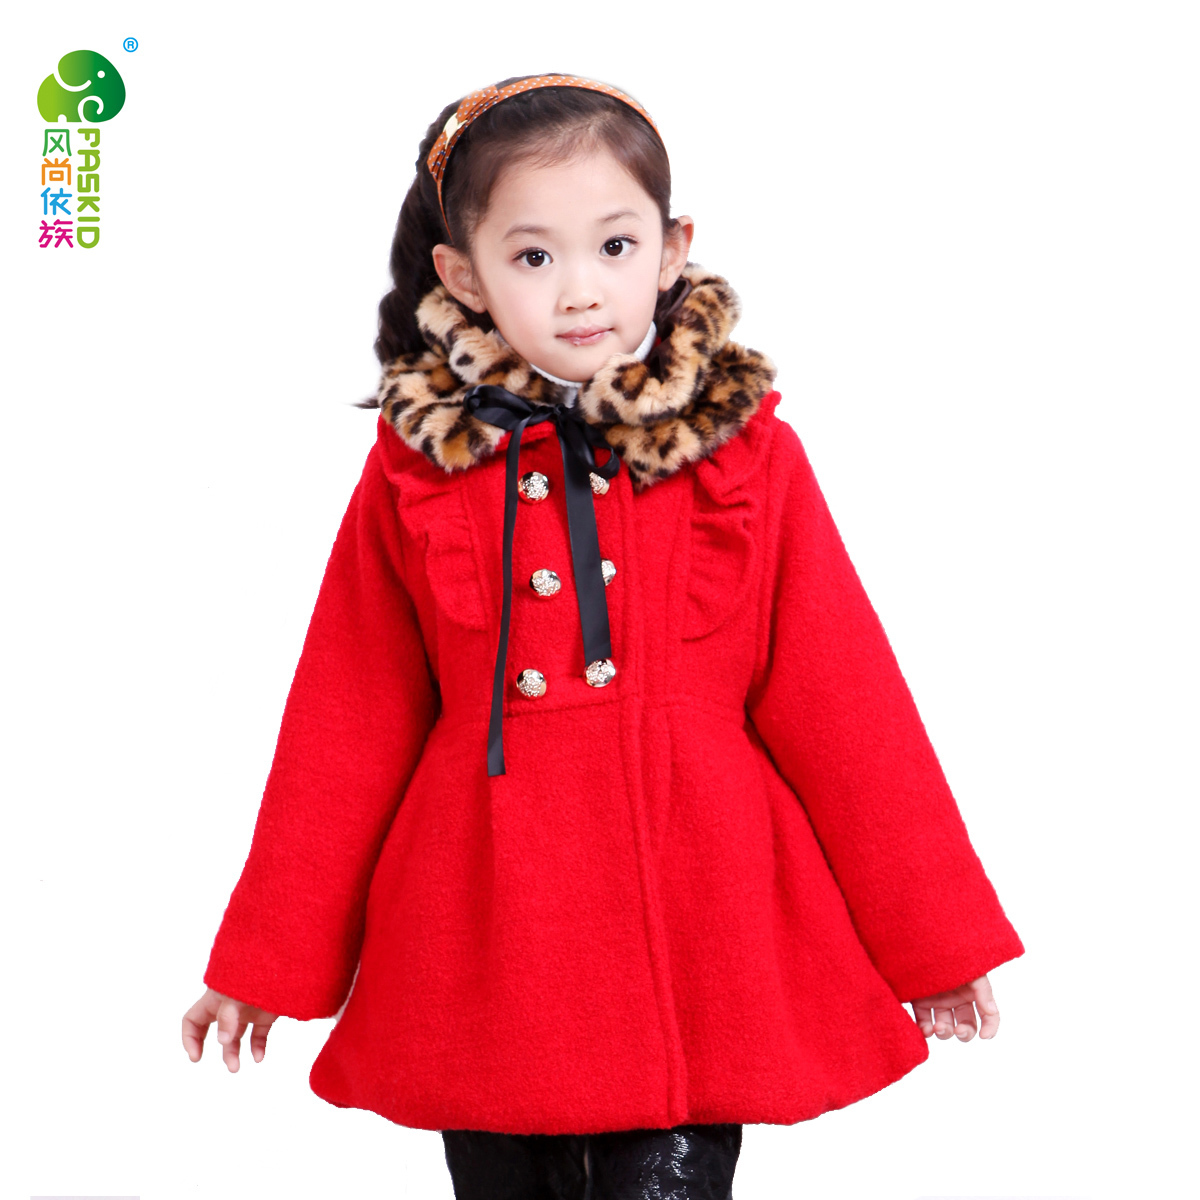 Female child overcoat 2012 winter child thickening thermal outerwear detachable leopard print trench female child